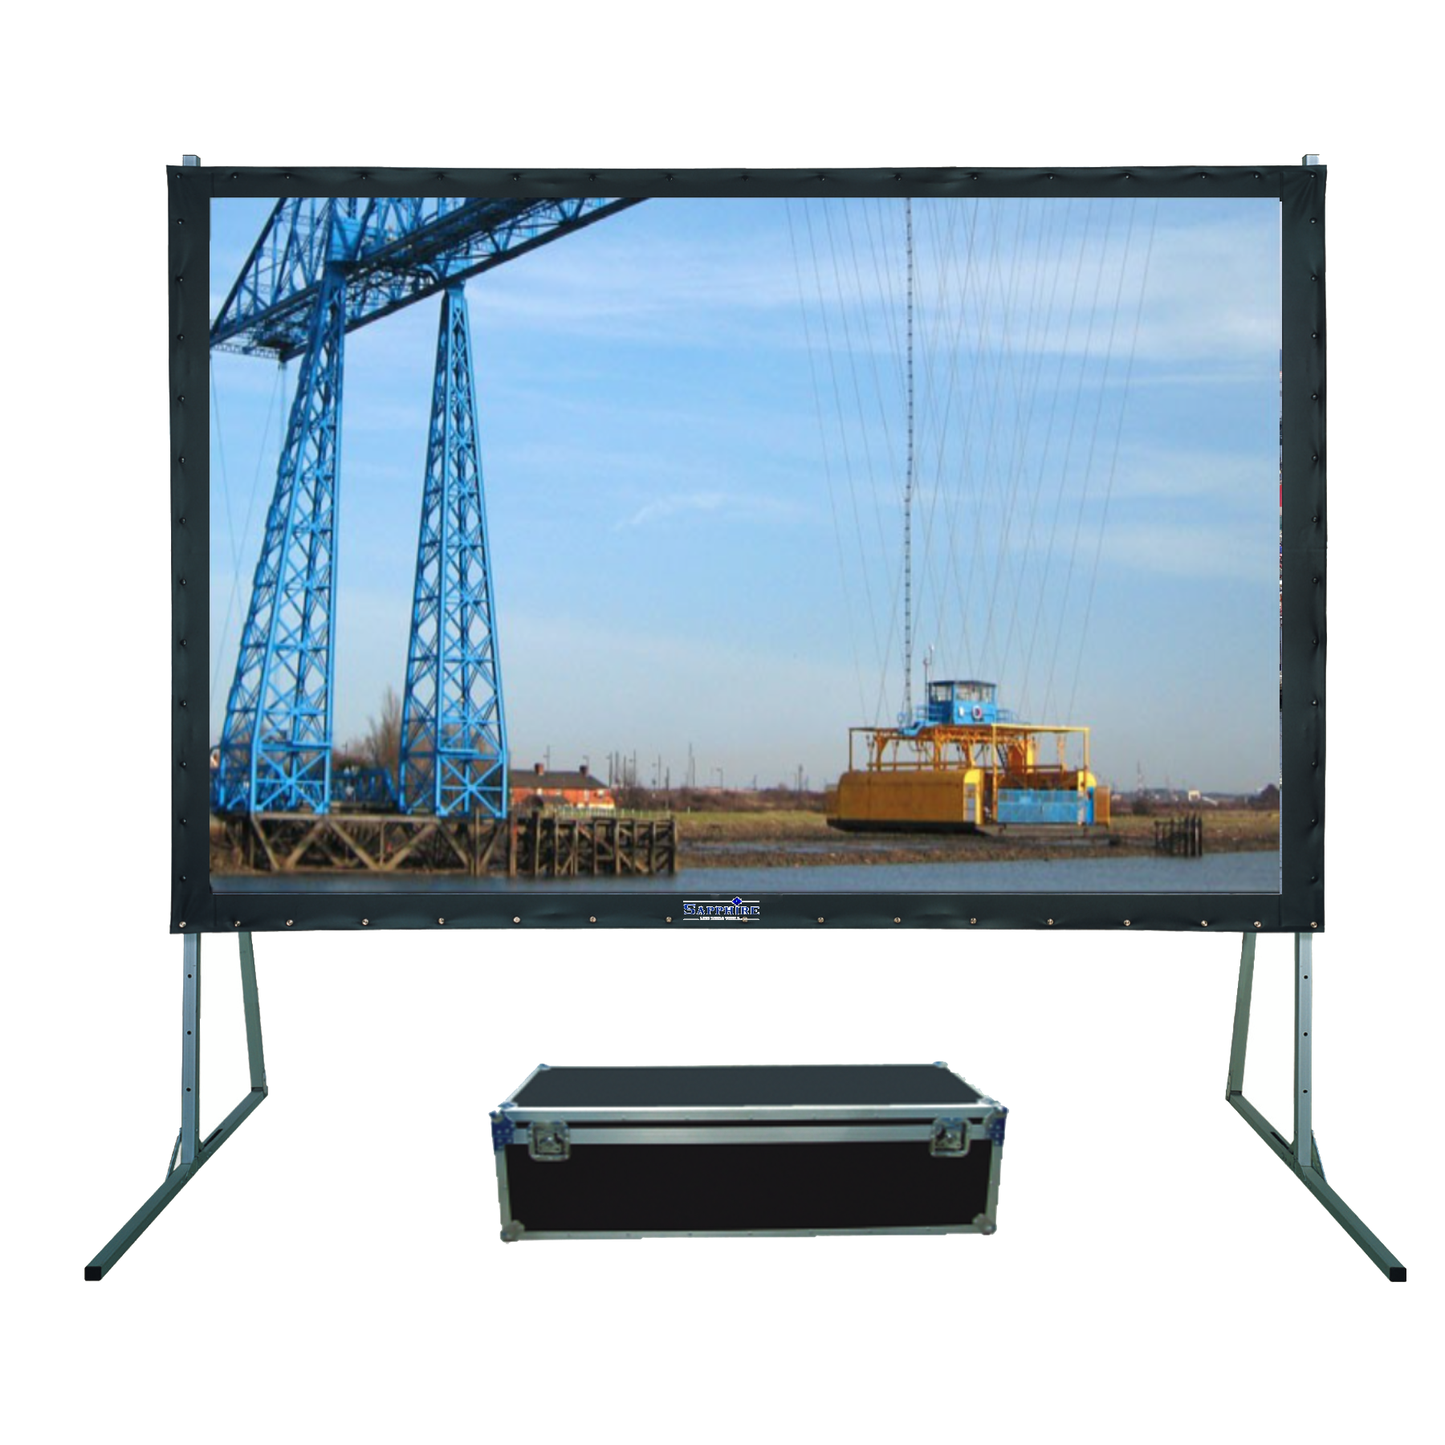 Sapphire Rapidfold Rear Projection Viewing Area 4046mm x 2528mm 16:10 Format